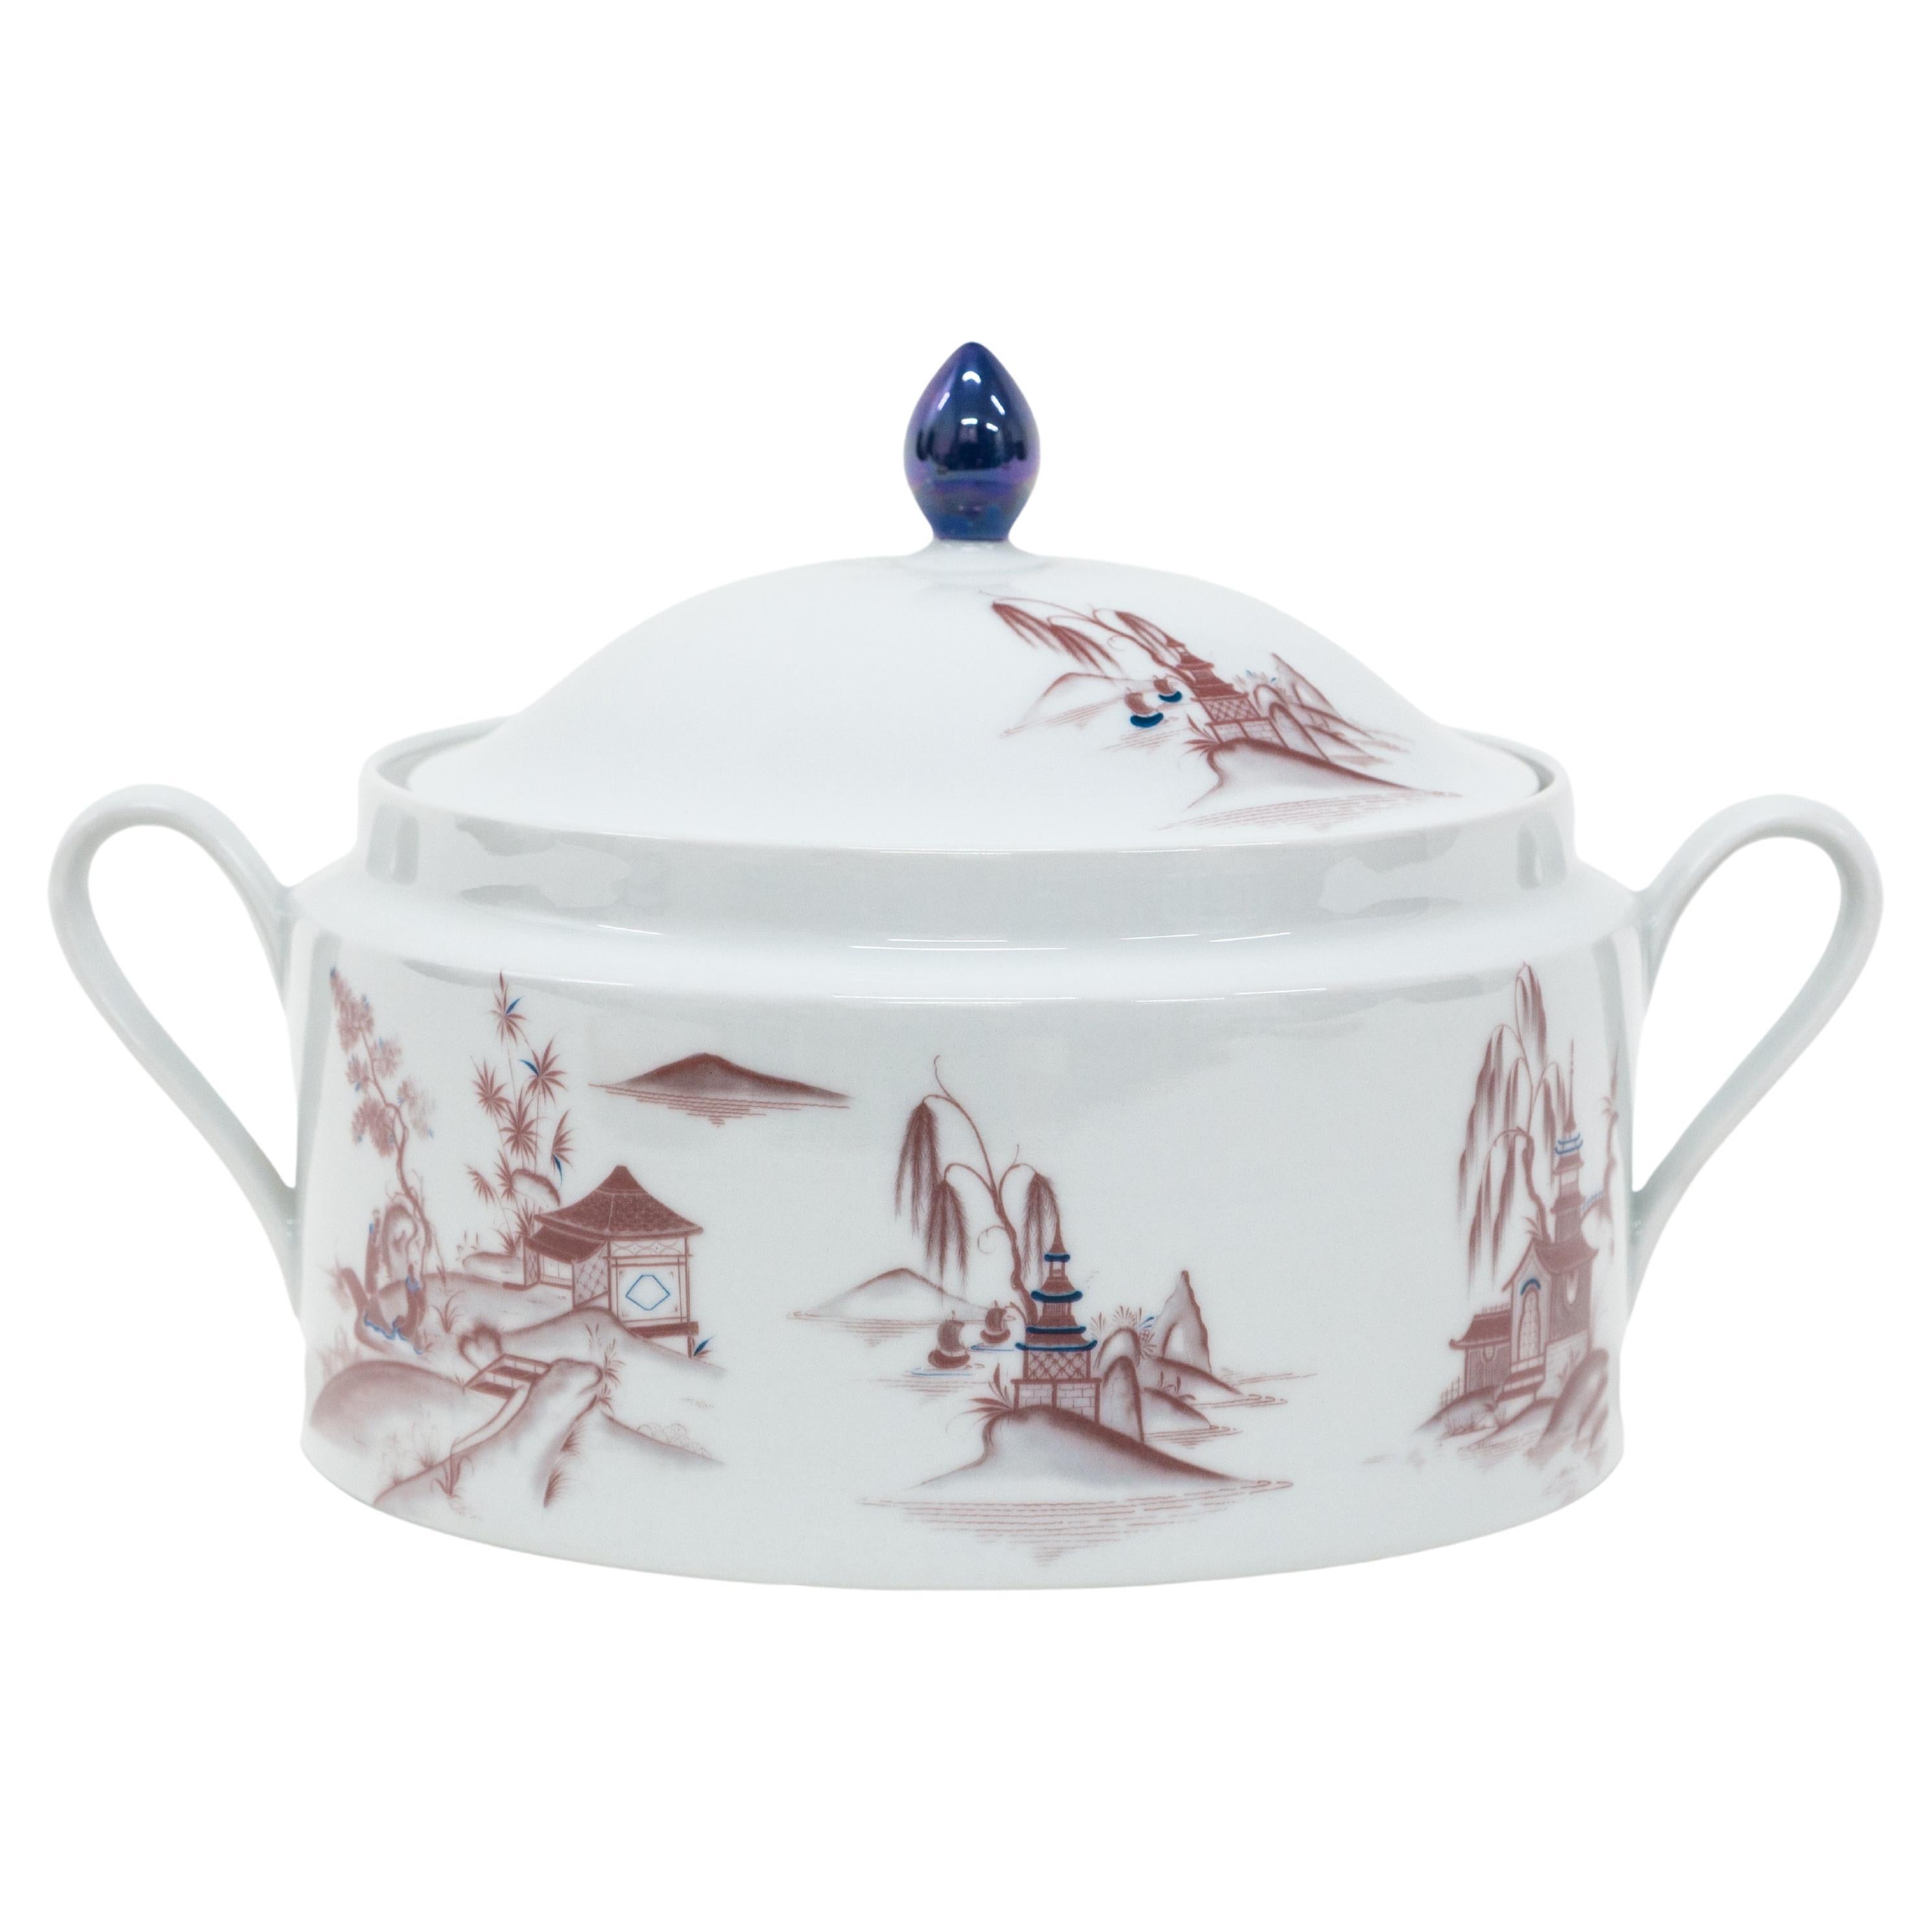 Natsumi, Contemporary Decorated Porcelain Tureen by Vito Nesta For Sale